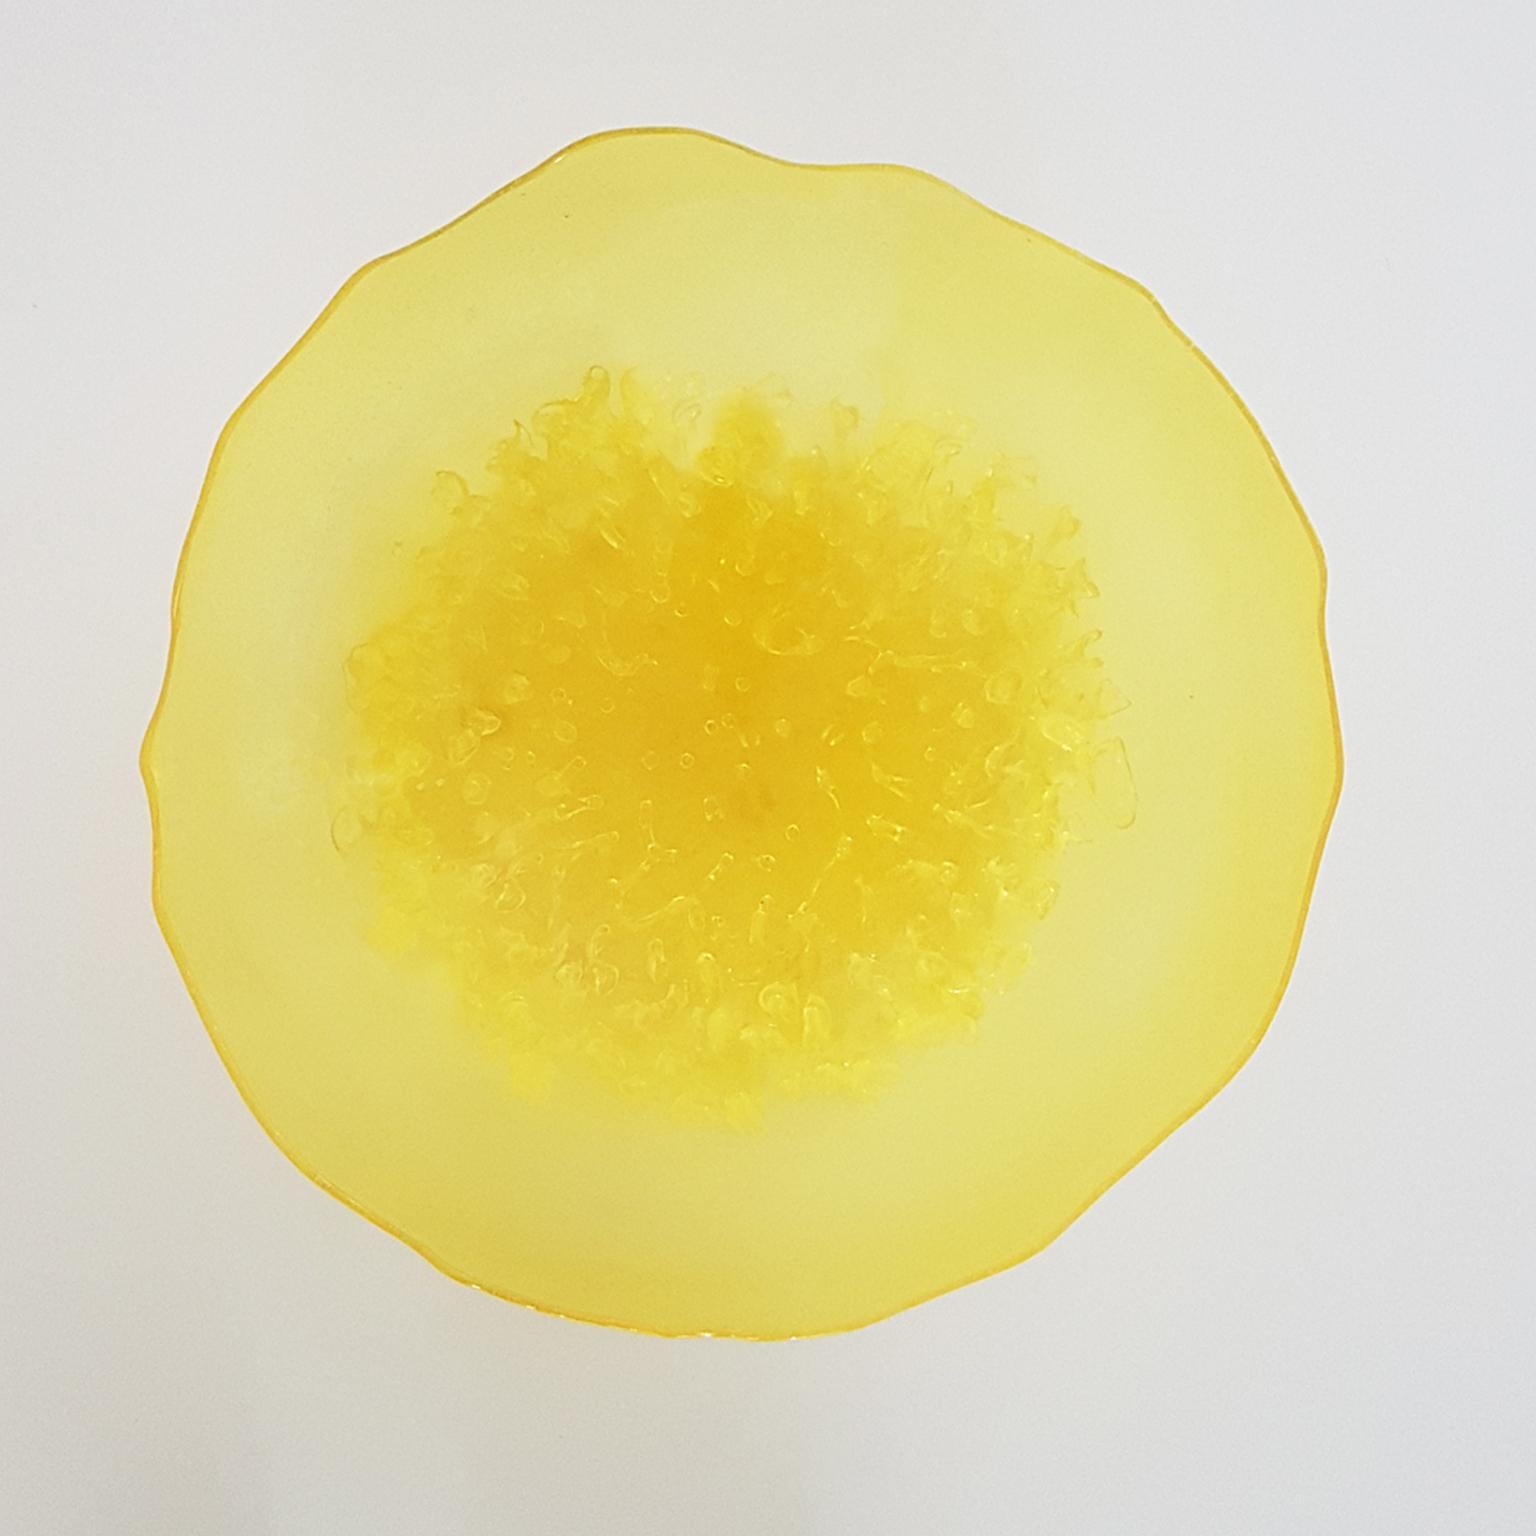 Other Gaetano Pesce Italian Contemporary Yellow Decorative Basket in Polyurethan Resin For Sale